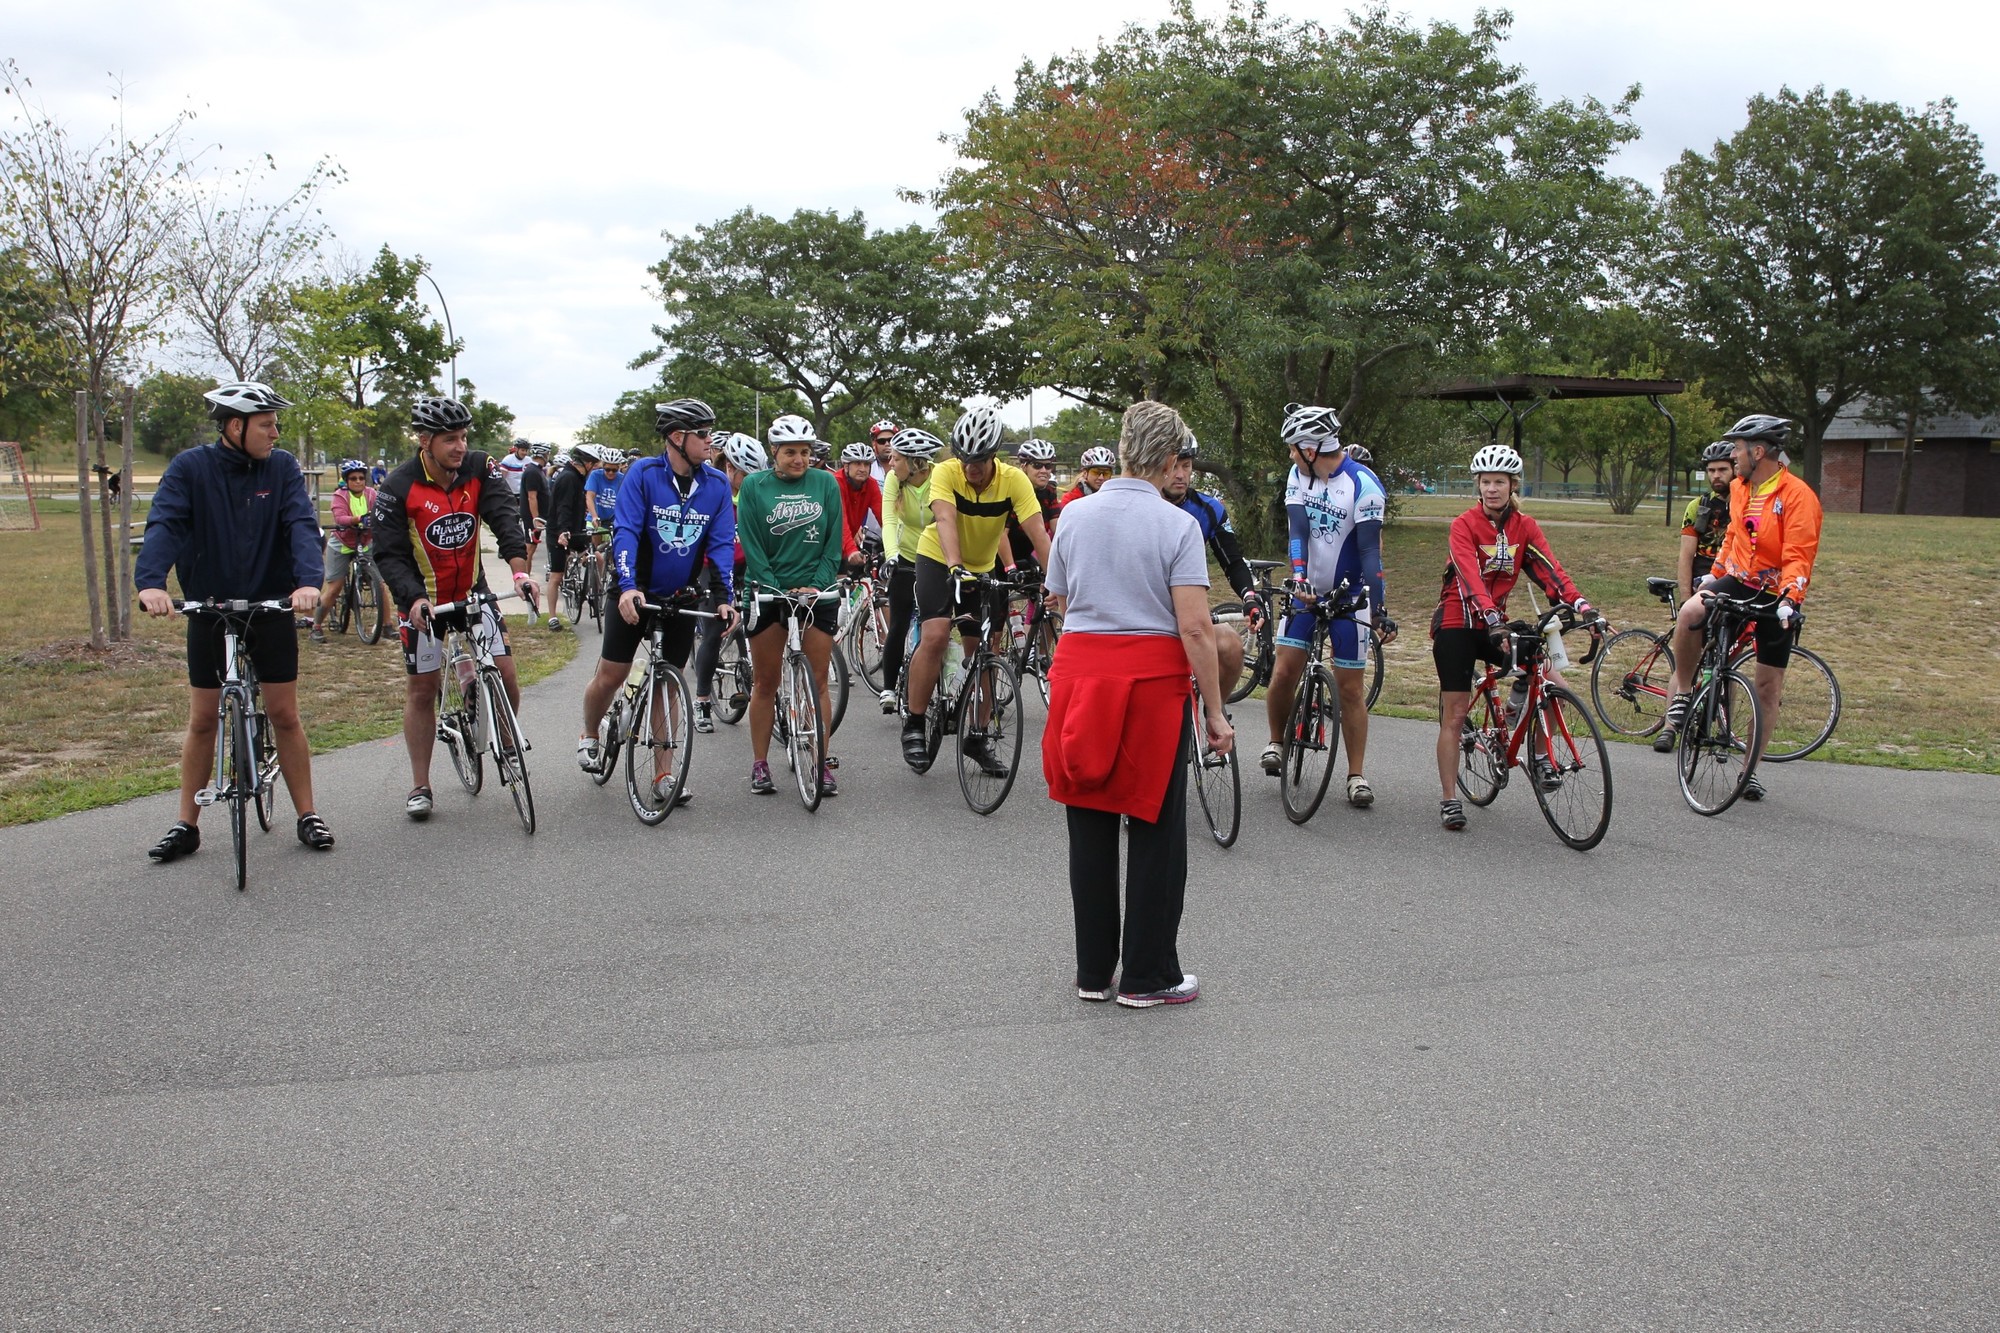 Riders lined up for the start of the 17.6 mile journey, which began at Cedar Creek Park.